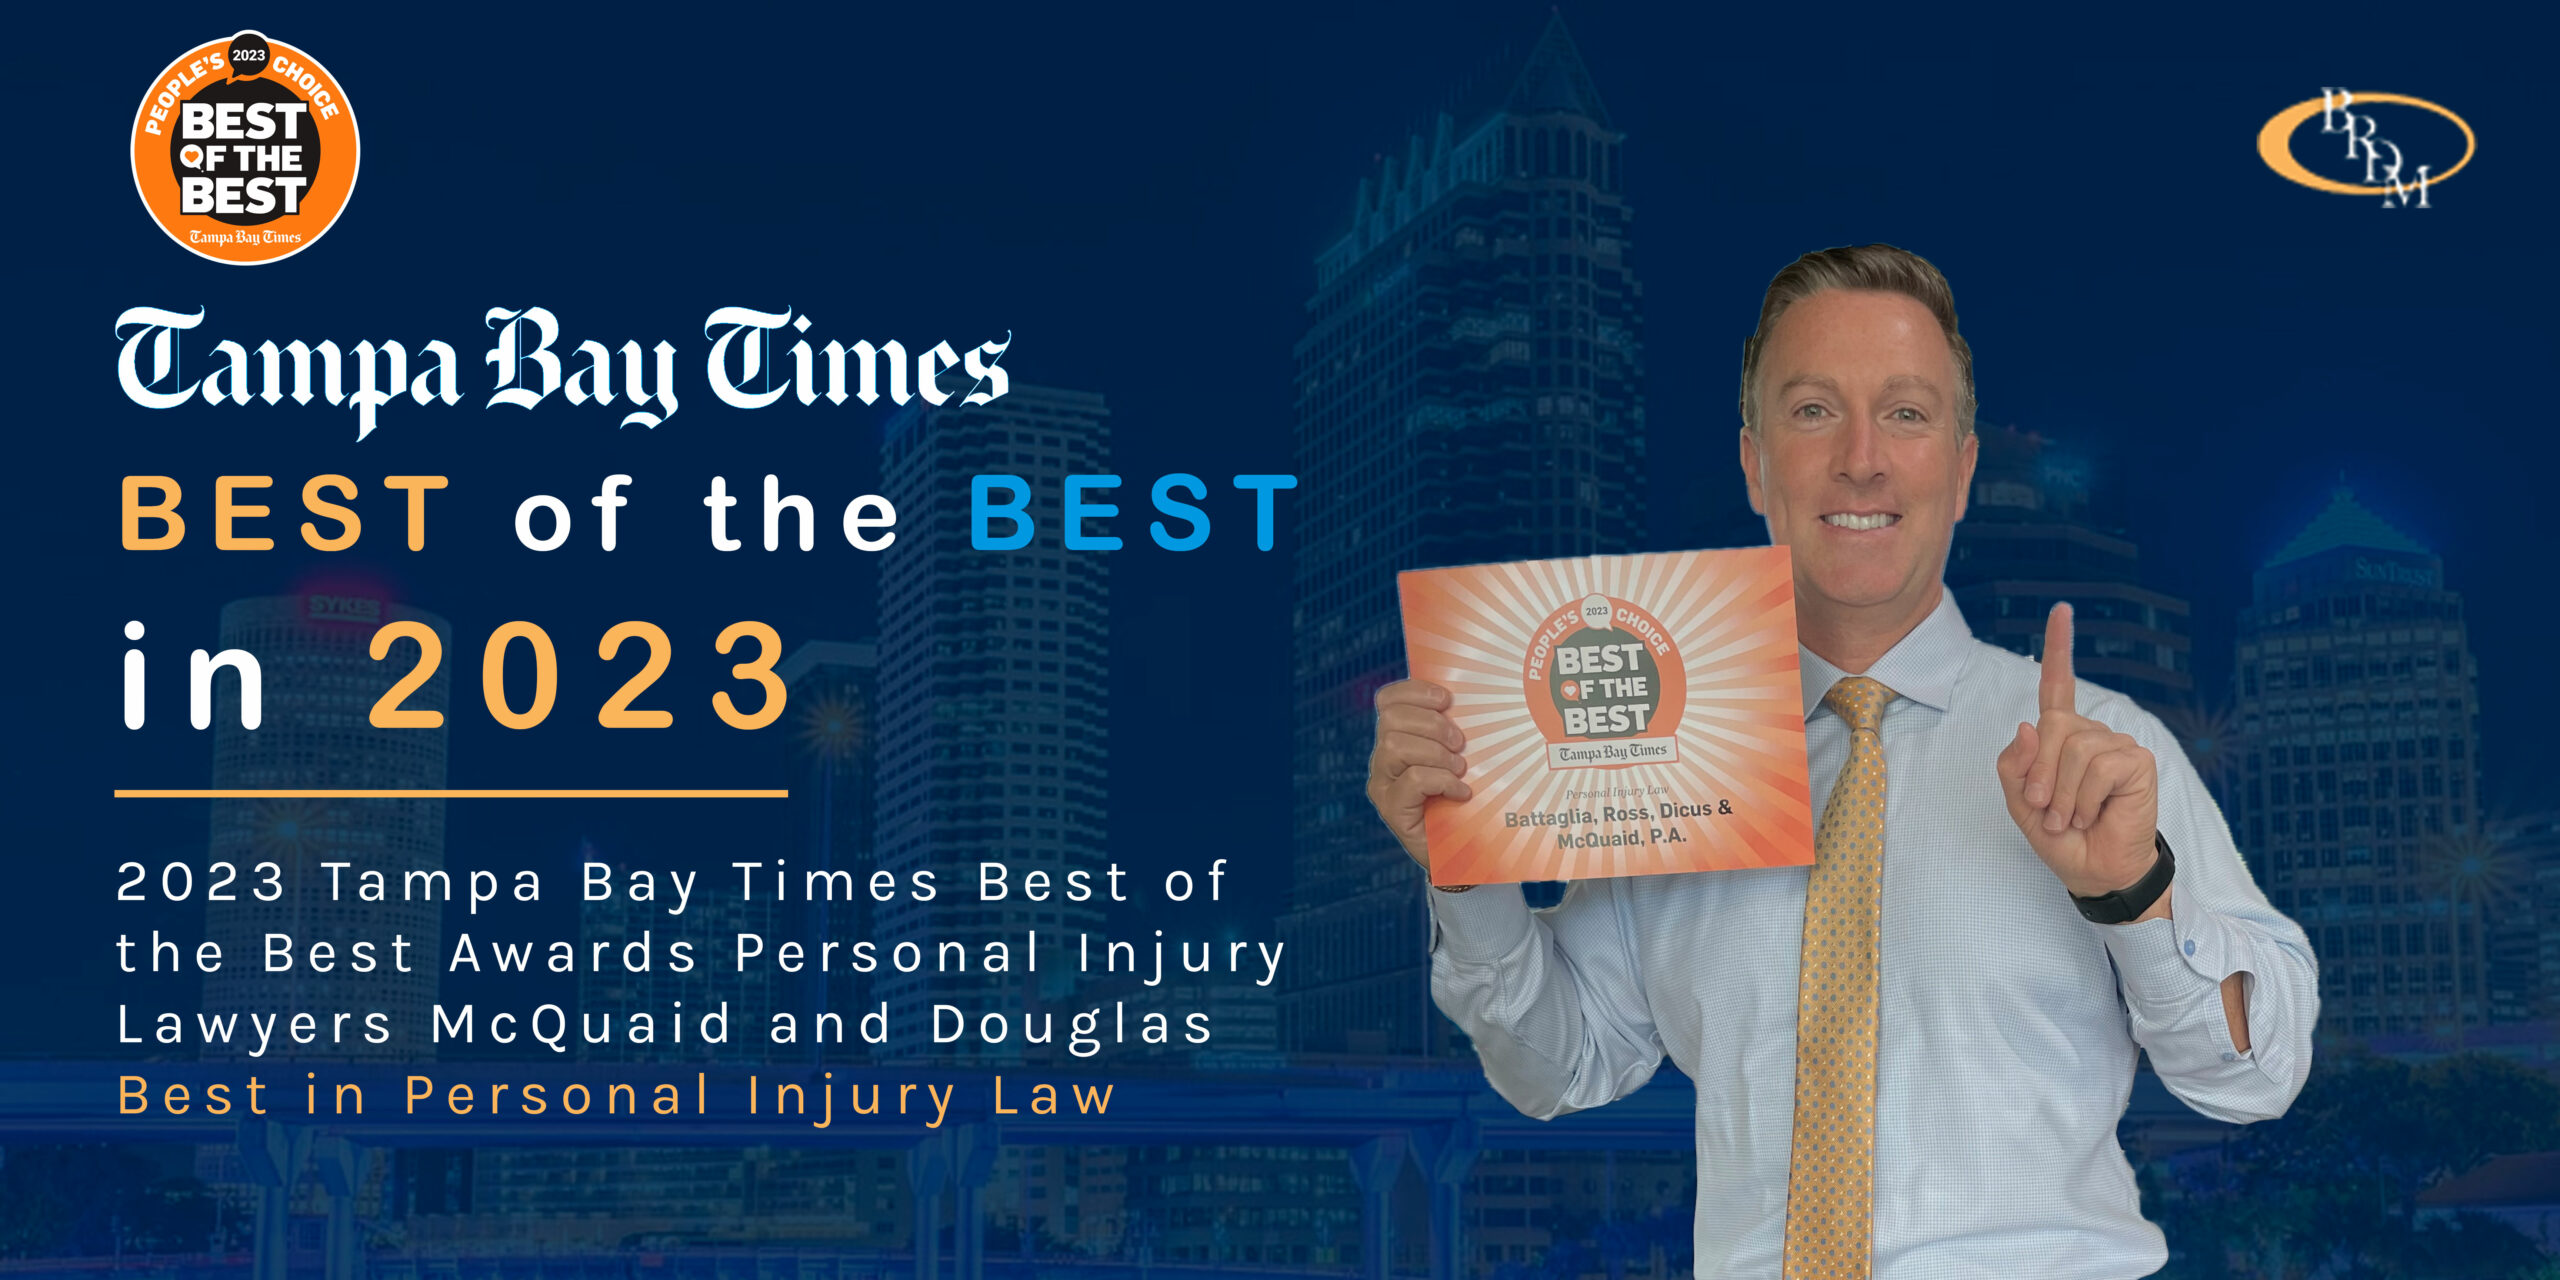 St. Petersburg Personal Injury Attorneys McQuaid & Douglas Win the Tampa Bay Times’ Best of the Best 2023 Award for Best Personal Injury Law